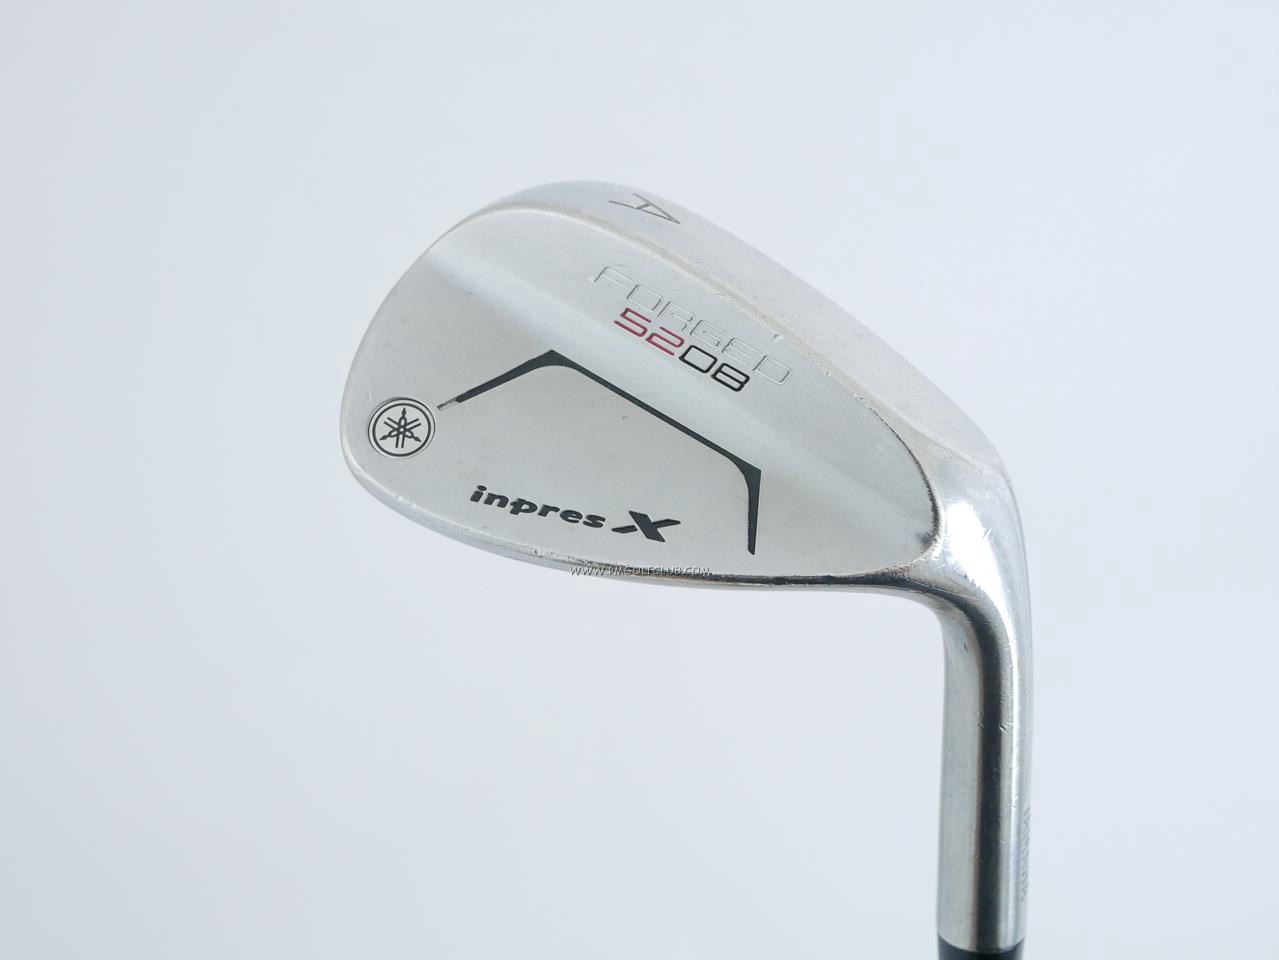 Wedge : Other : Wedge Yamaha Inpres X Forged Loft 52 ก้านเหล็ก Dynamic Gold S200